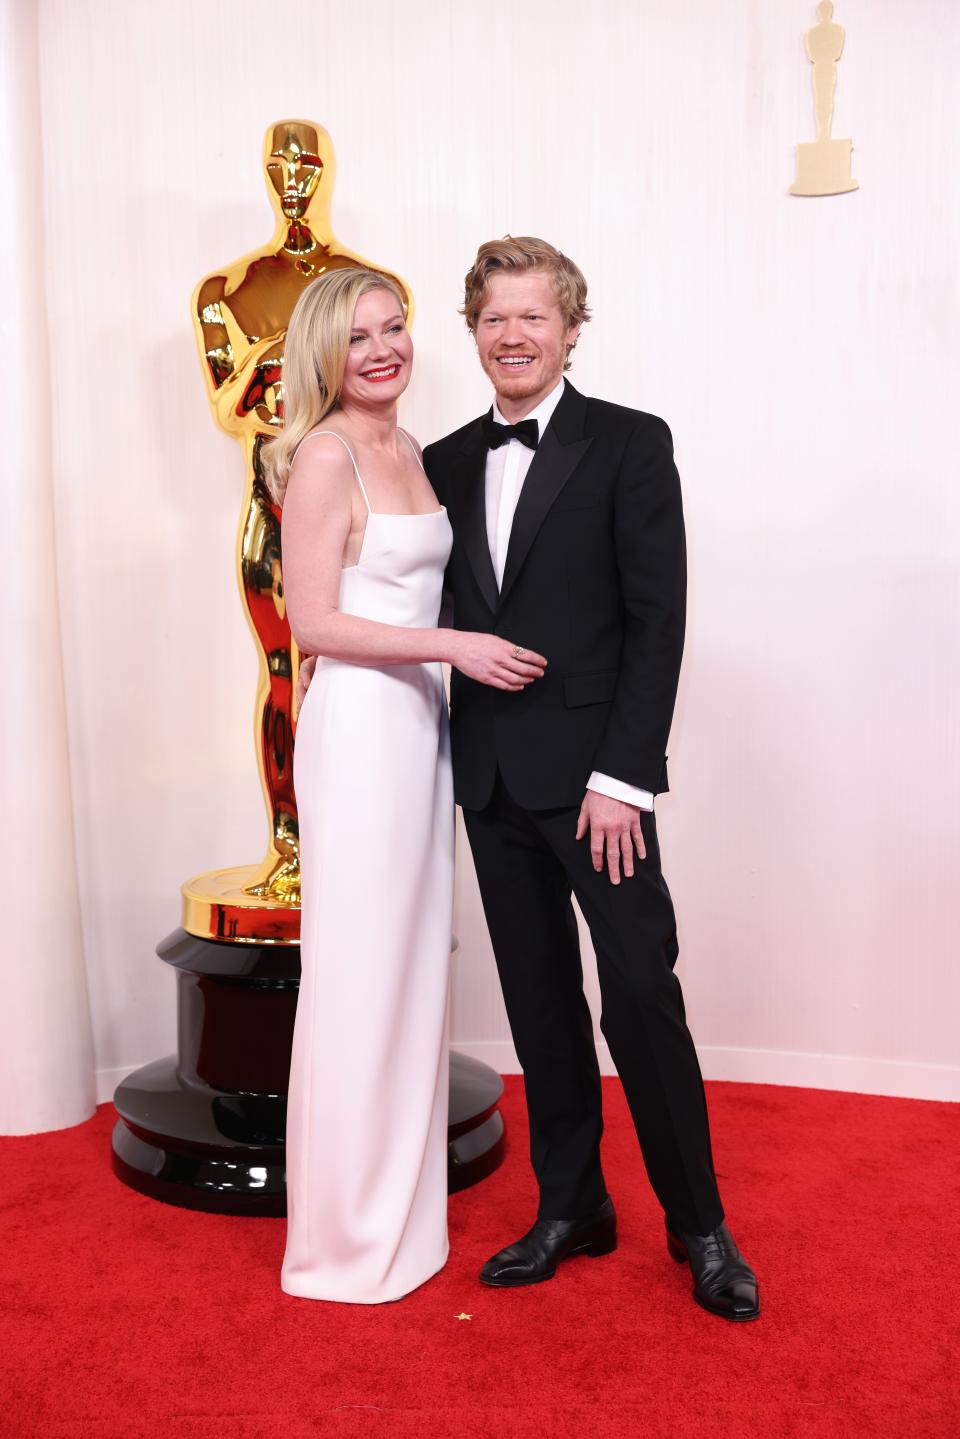 Image may contain: Jesse Plemons, Kirsten Dunst, Fashion, Accessories, Formal Wear, Tie, Clothing, Footwear, Shoe, and Adult